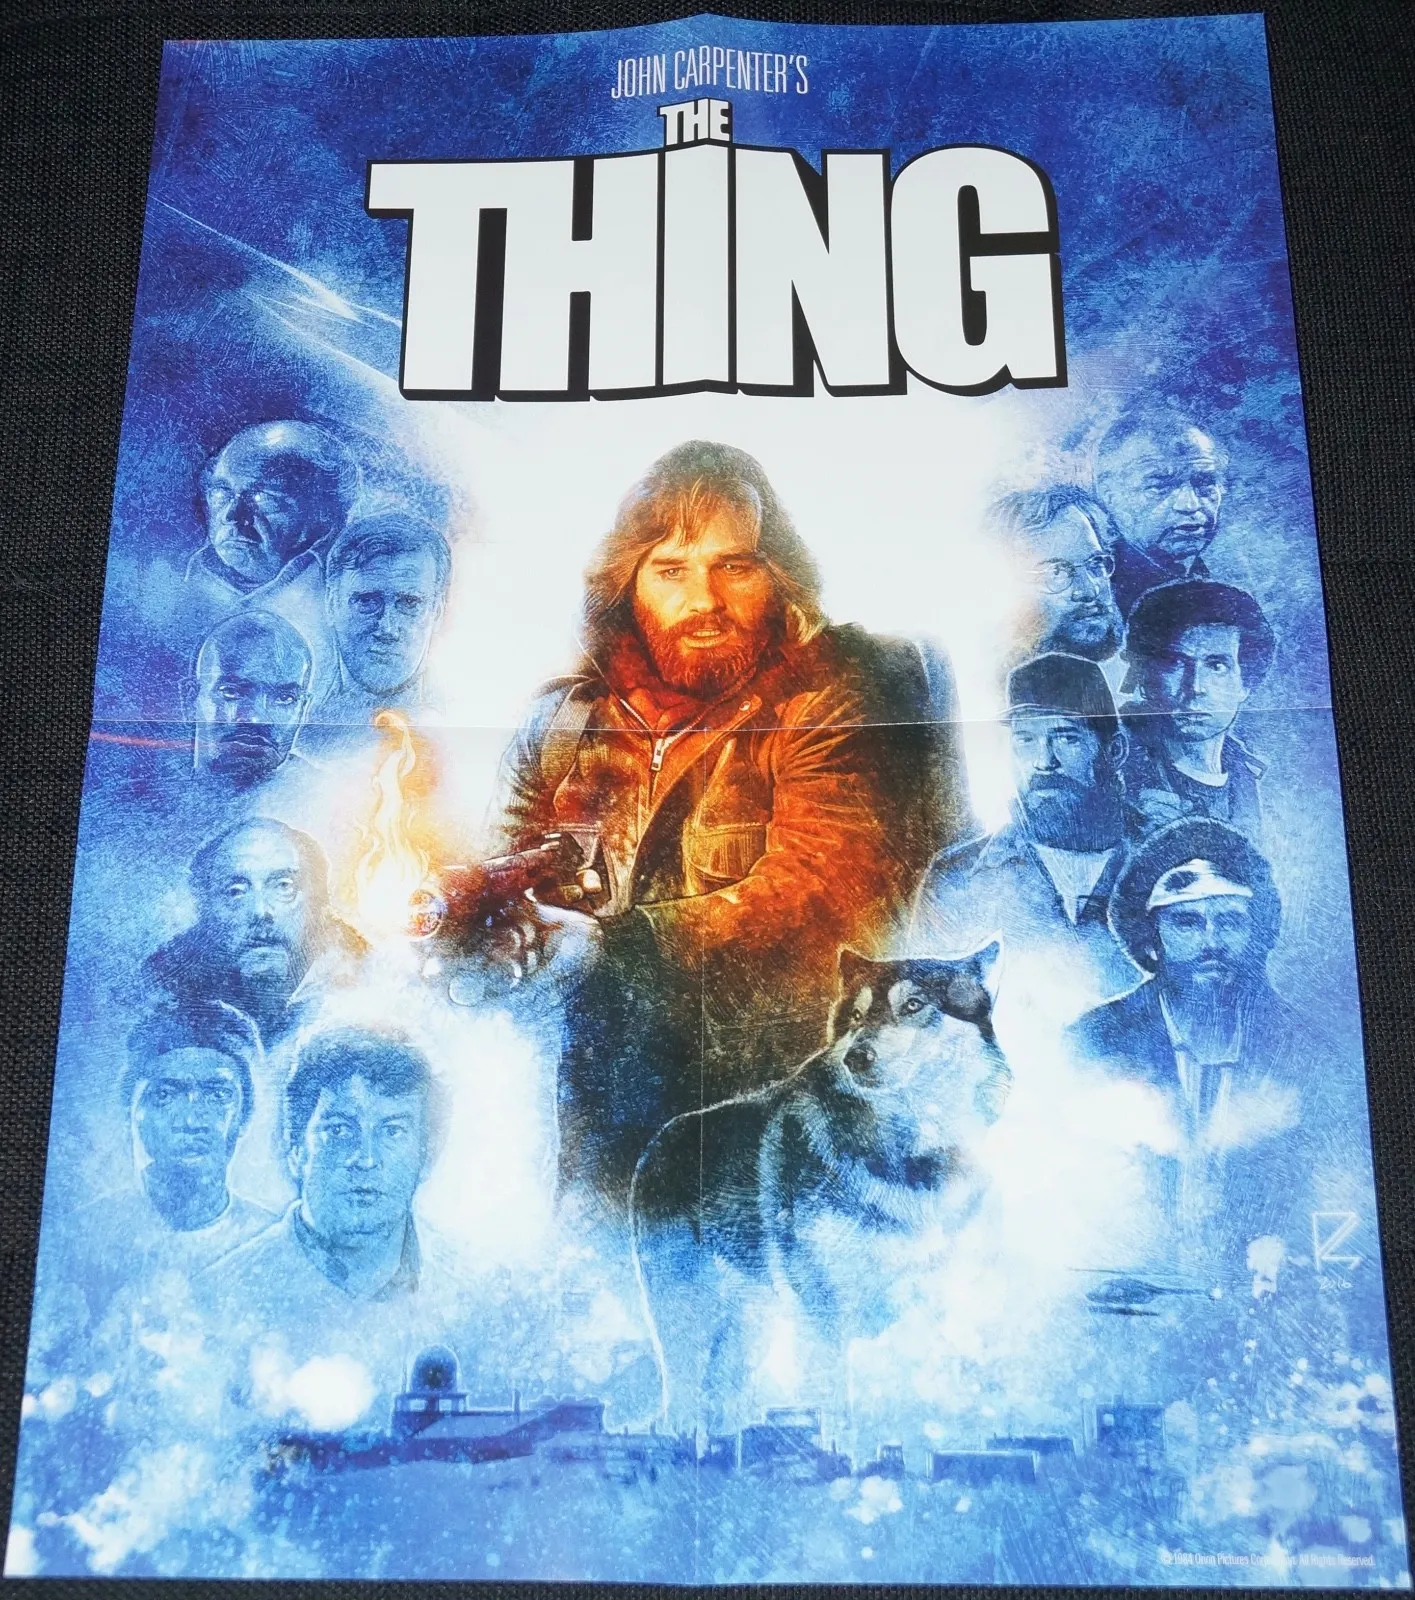 The Thing - Scream Factory Shout Poster - New Limited Oop Rare John Carpenter